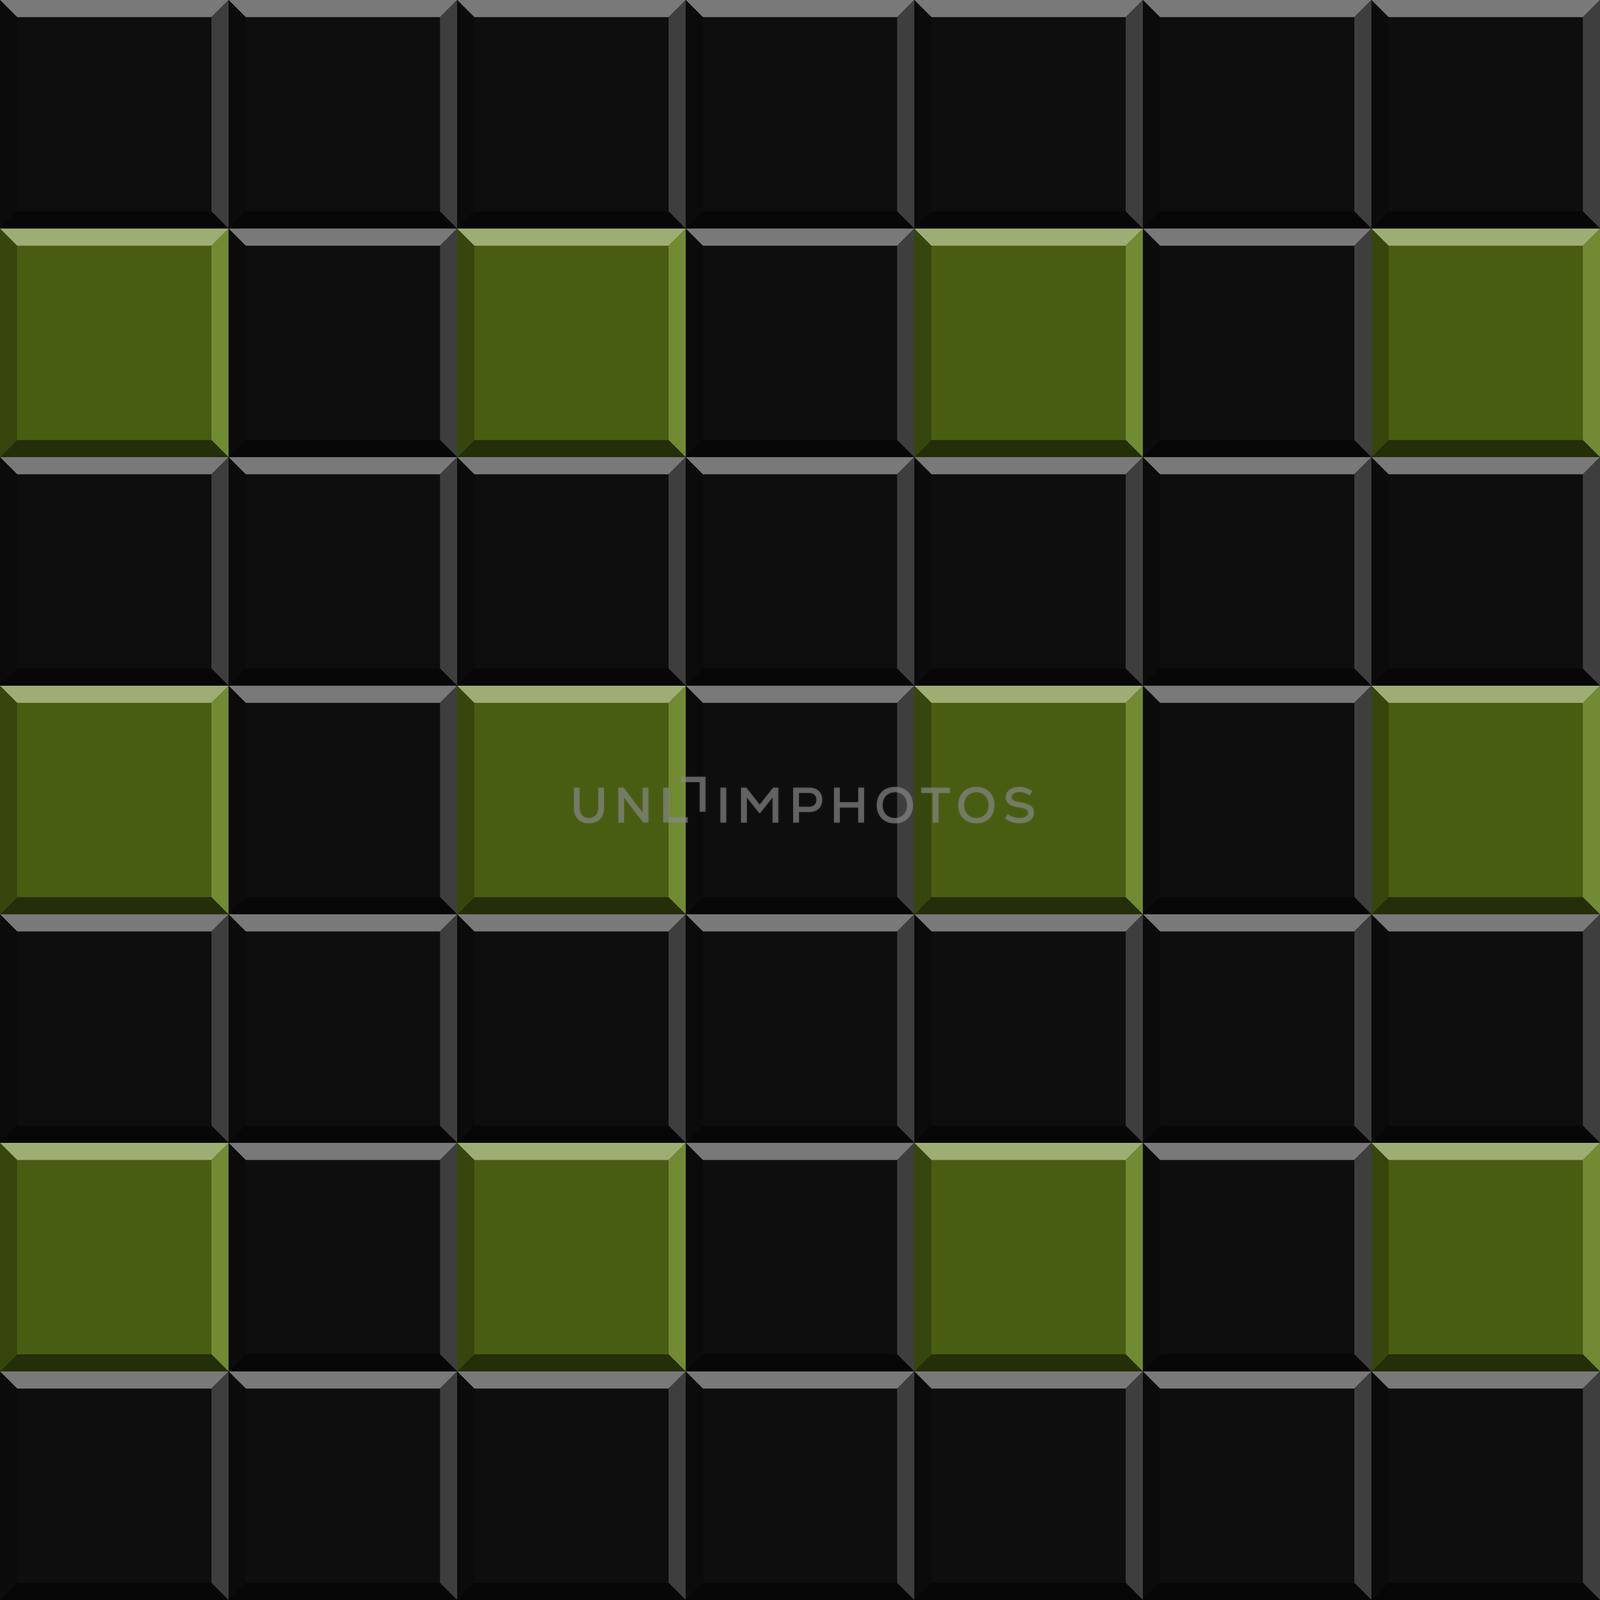 Black and shades of green bricks pattern on solid sheet of wallpaper. Concept of home decor and interior designing